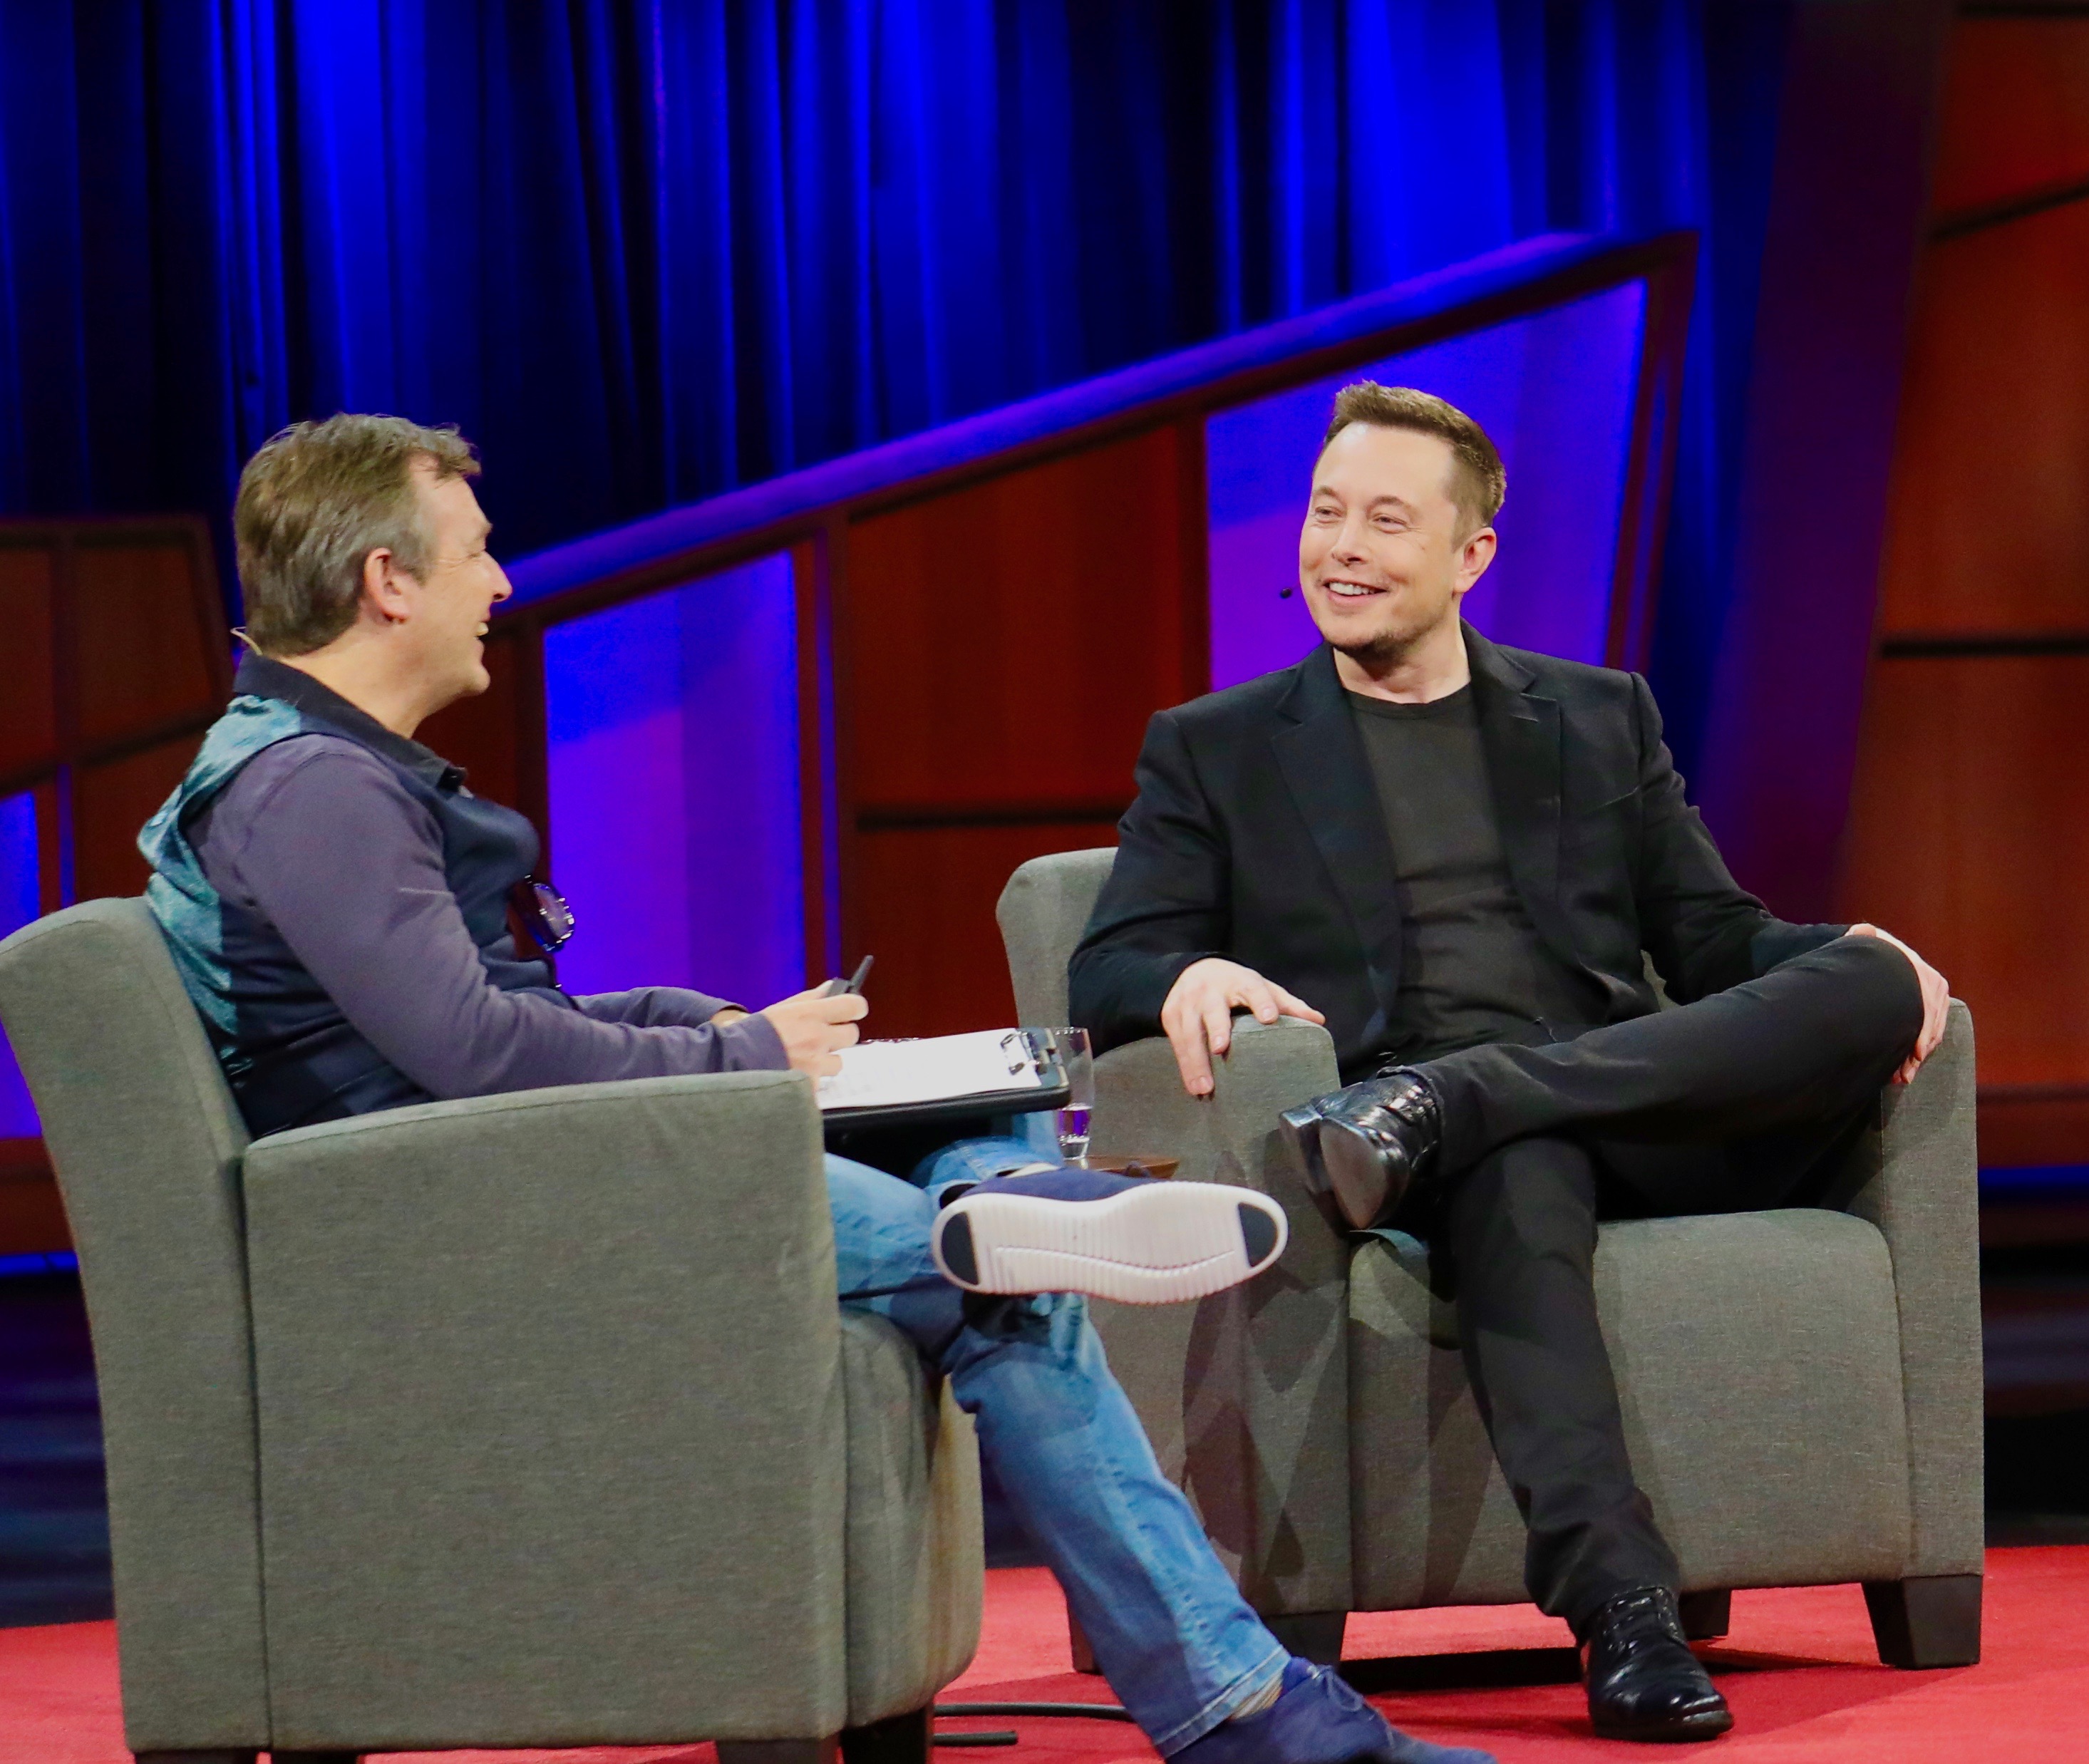 Elon Musk, the CEO of SpaceX is among the people who advocate for colonizing Mars. https:/commons.wikimedia.org/wiki/File:Elon_Musk_and_Chris_Anderson_at_TED_2017_(33486317634).jpg; 